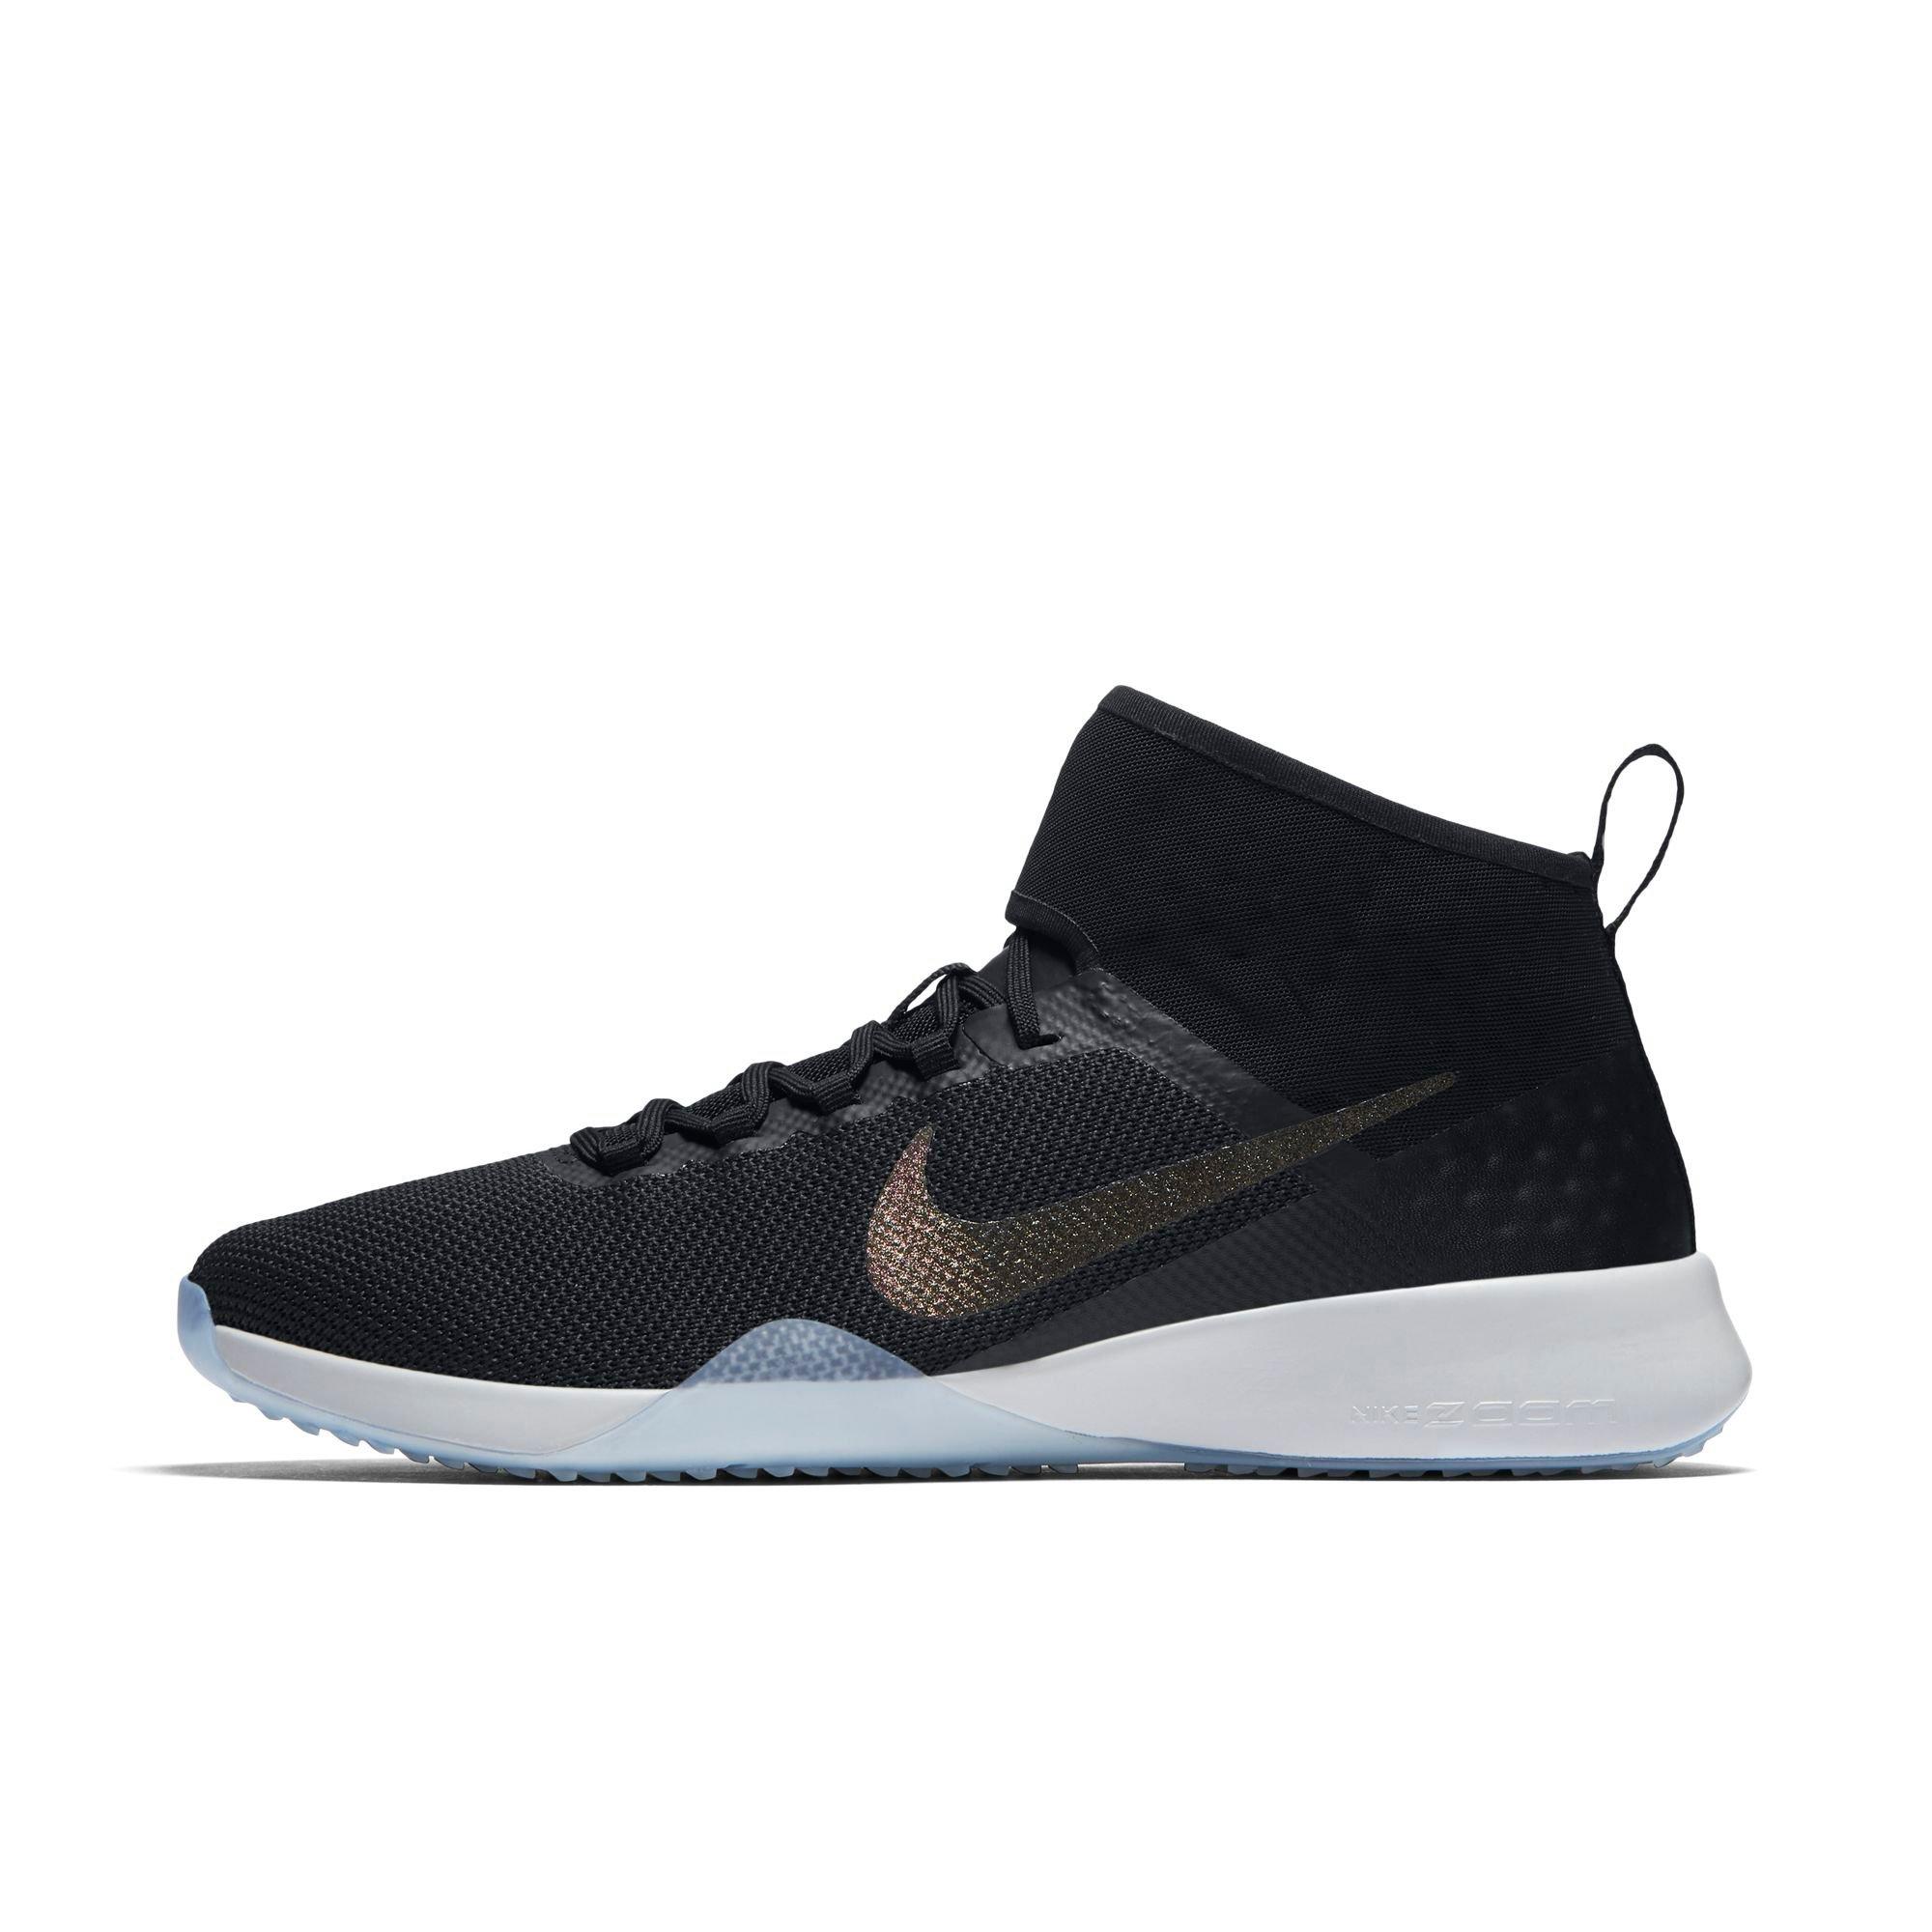 nike air zoom strong women's